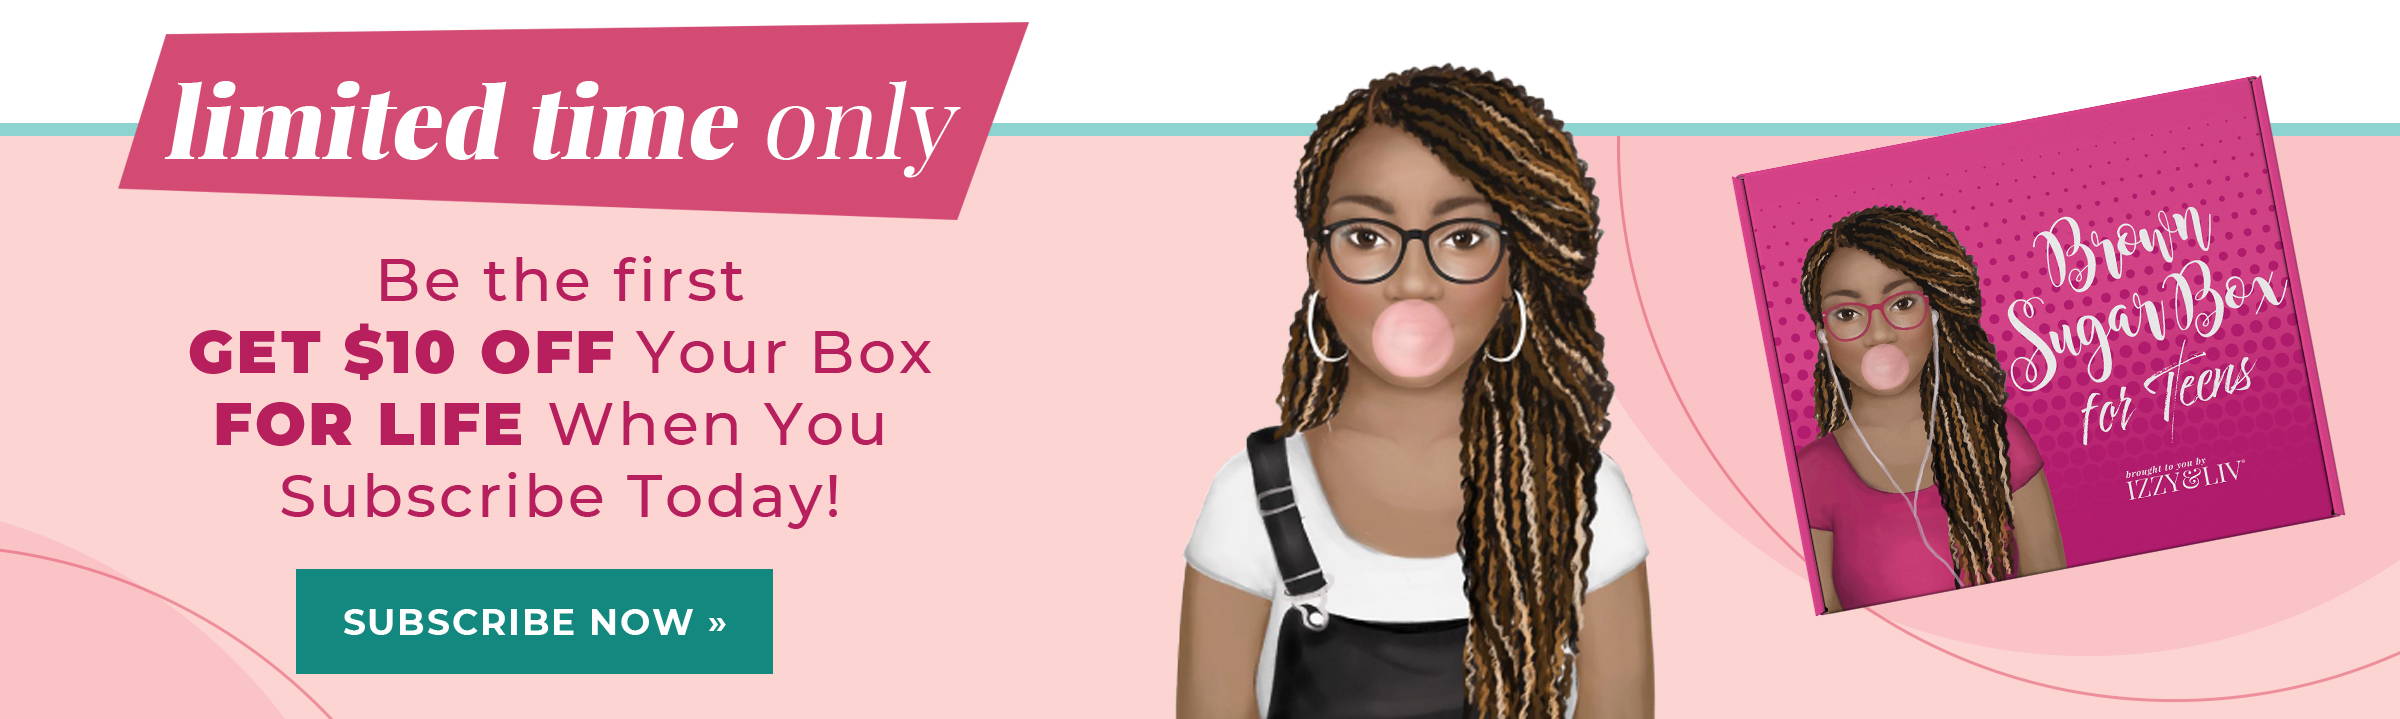 Limited Time! Get $10 Off Your Box For Life When You Subscribe Today! - Subscribe Now!